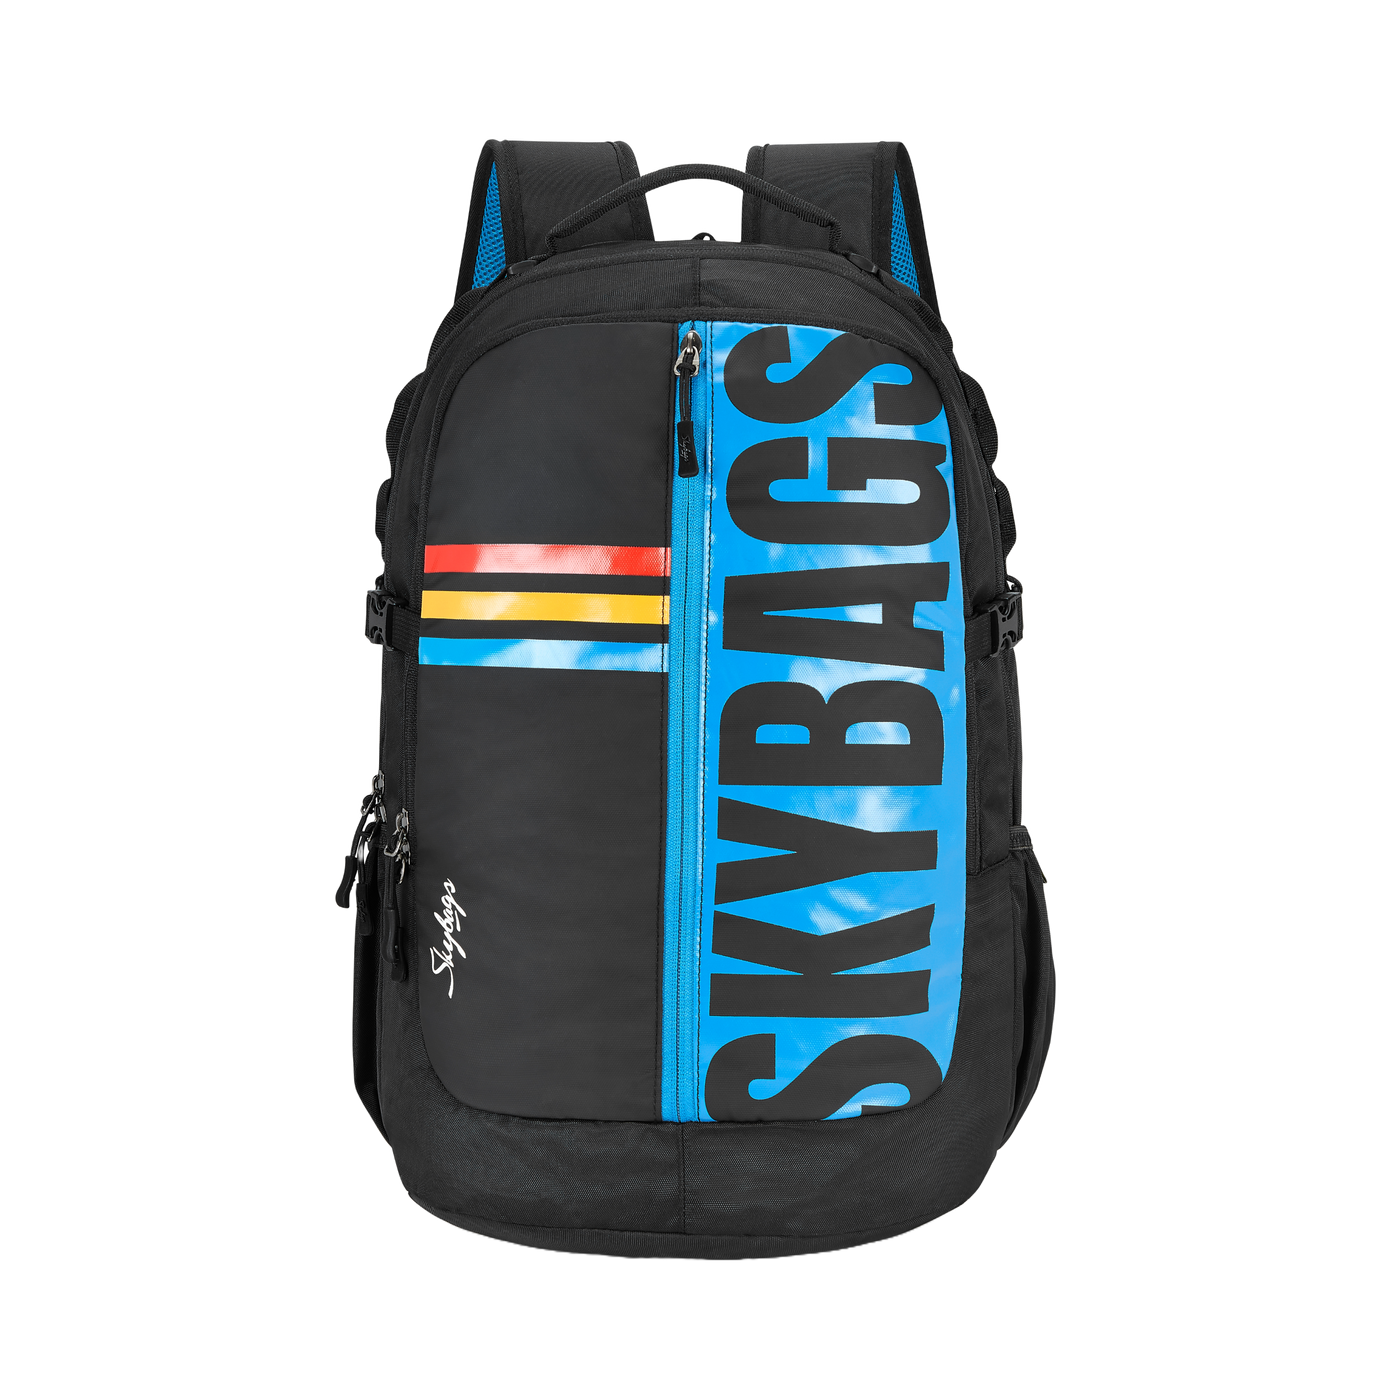 Skybags Strider Nxt 04 